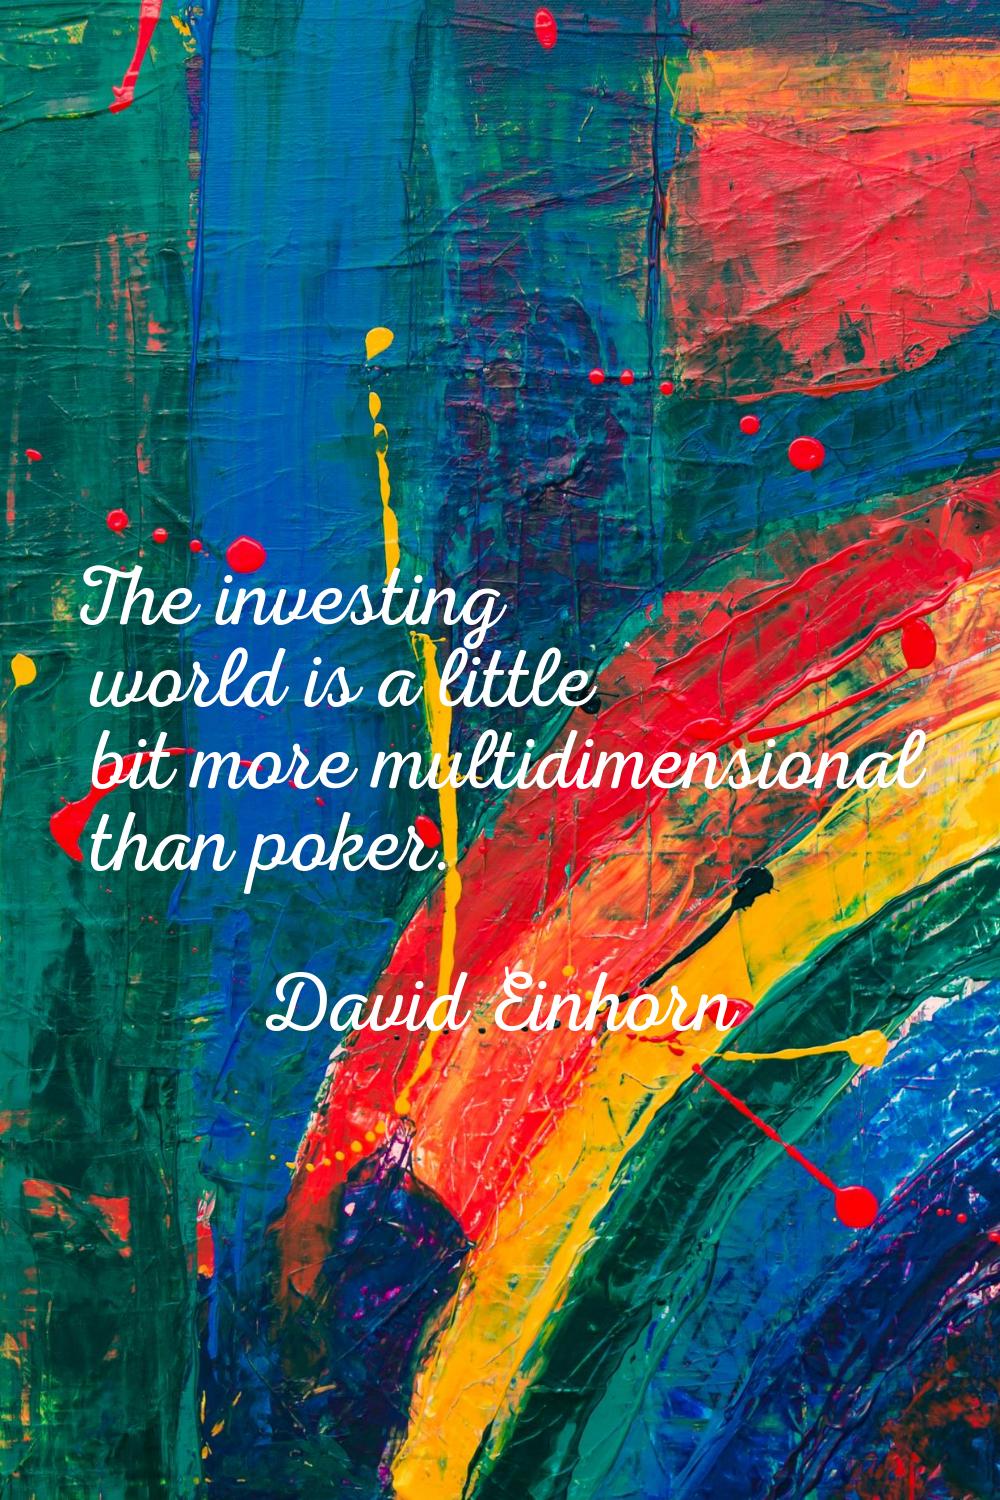 The investing world is a little bit more multidimensional than poker.